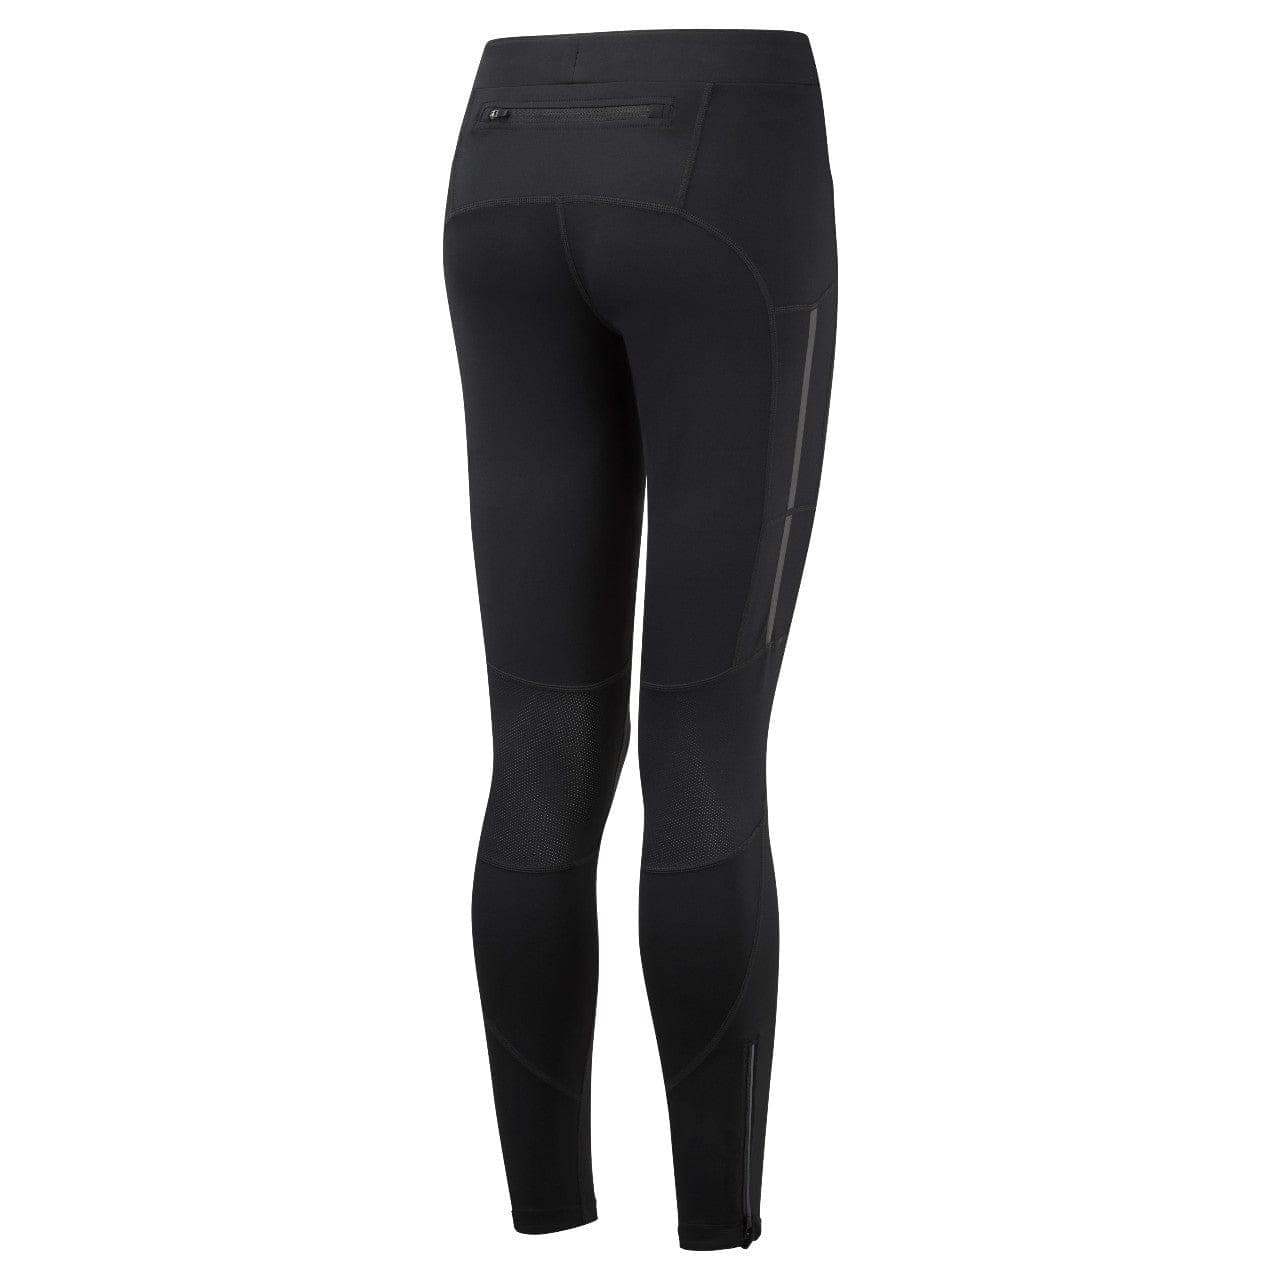 Tech Afterhours Women's Running Tights Black/Charcoal/Reflect - Clothing  from Northern Runner UK